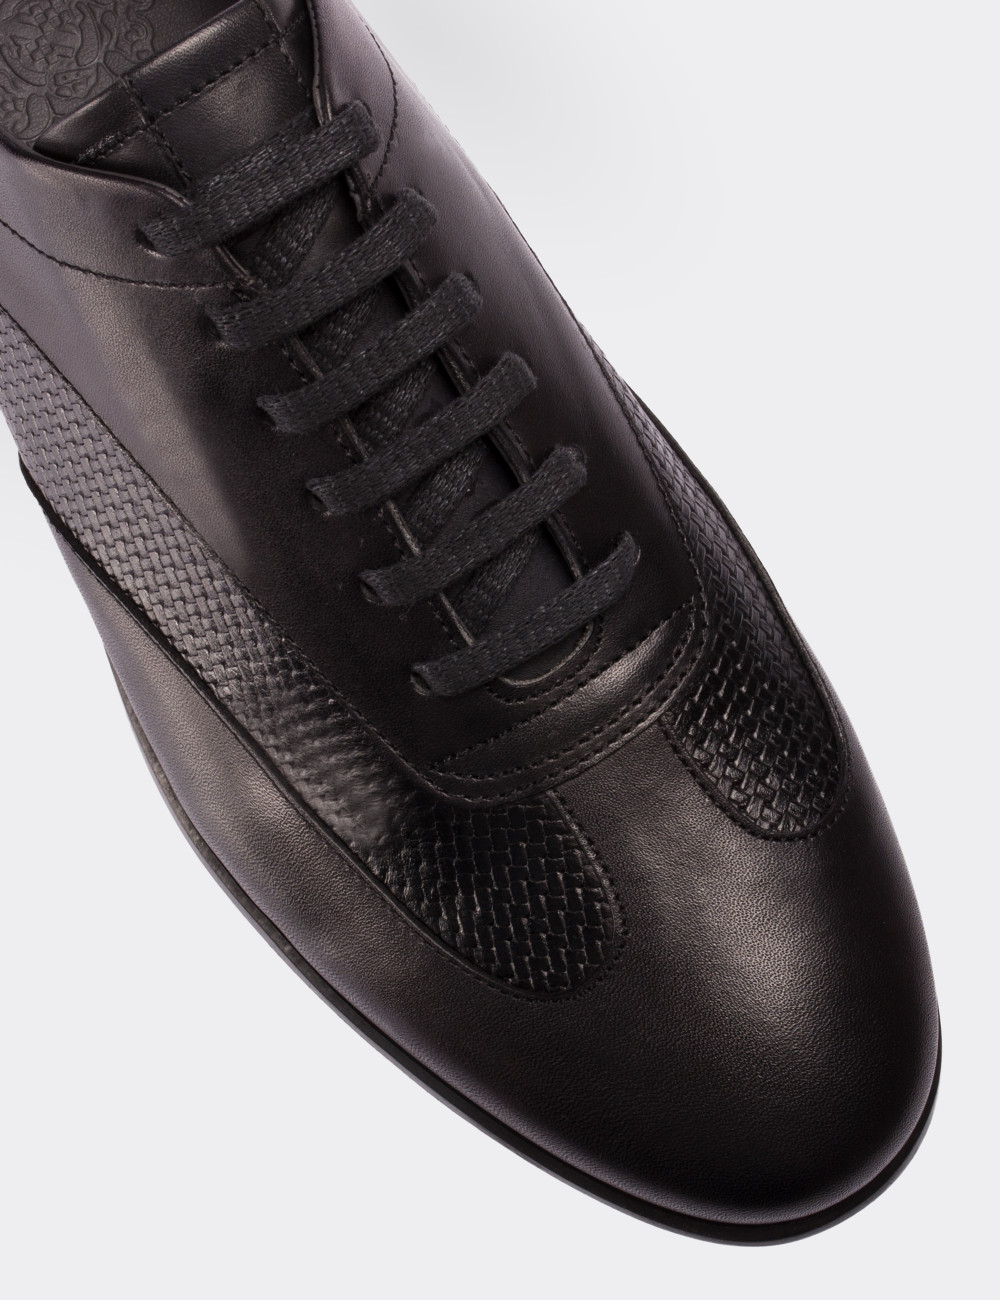 Black  Leather Lace-up Shoes - 01686MSYHC01